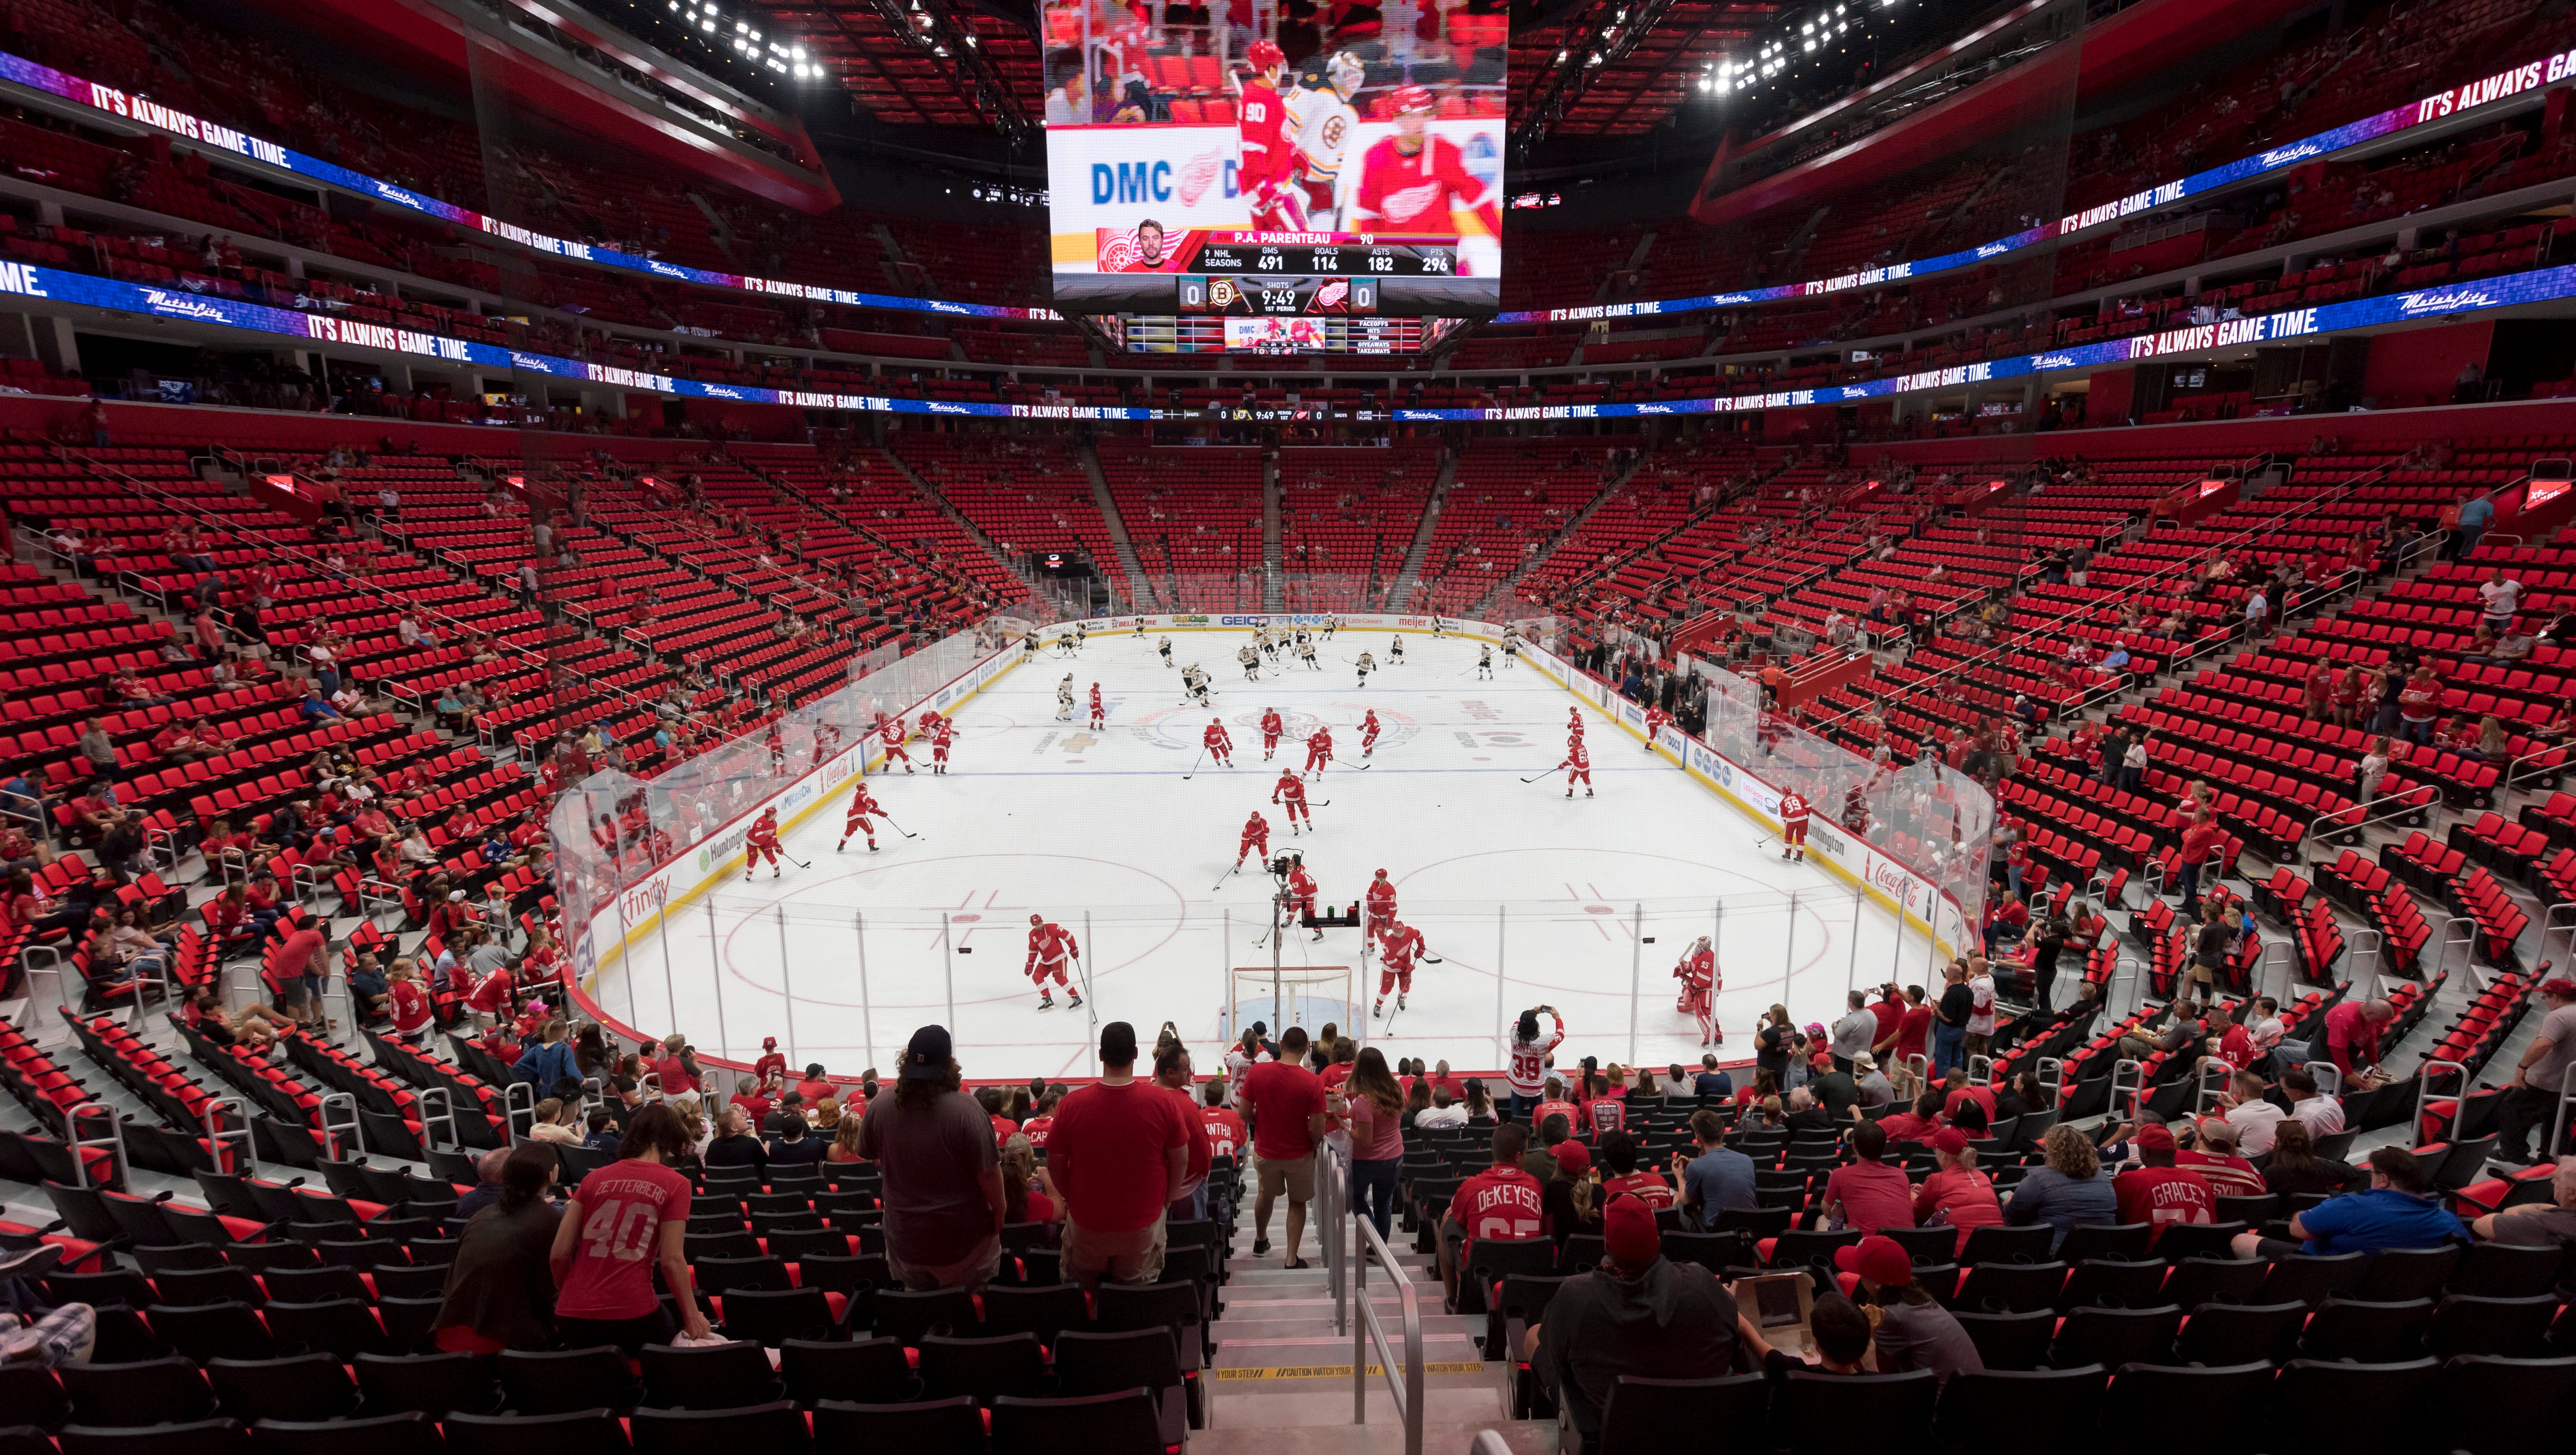 This the view from behind the Red Wings goal before their first preseason game.